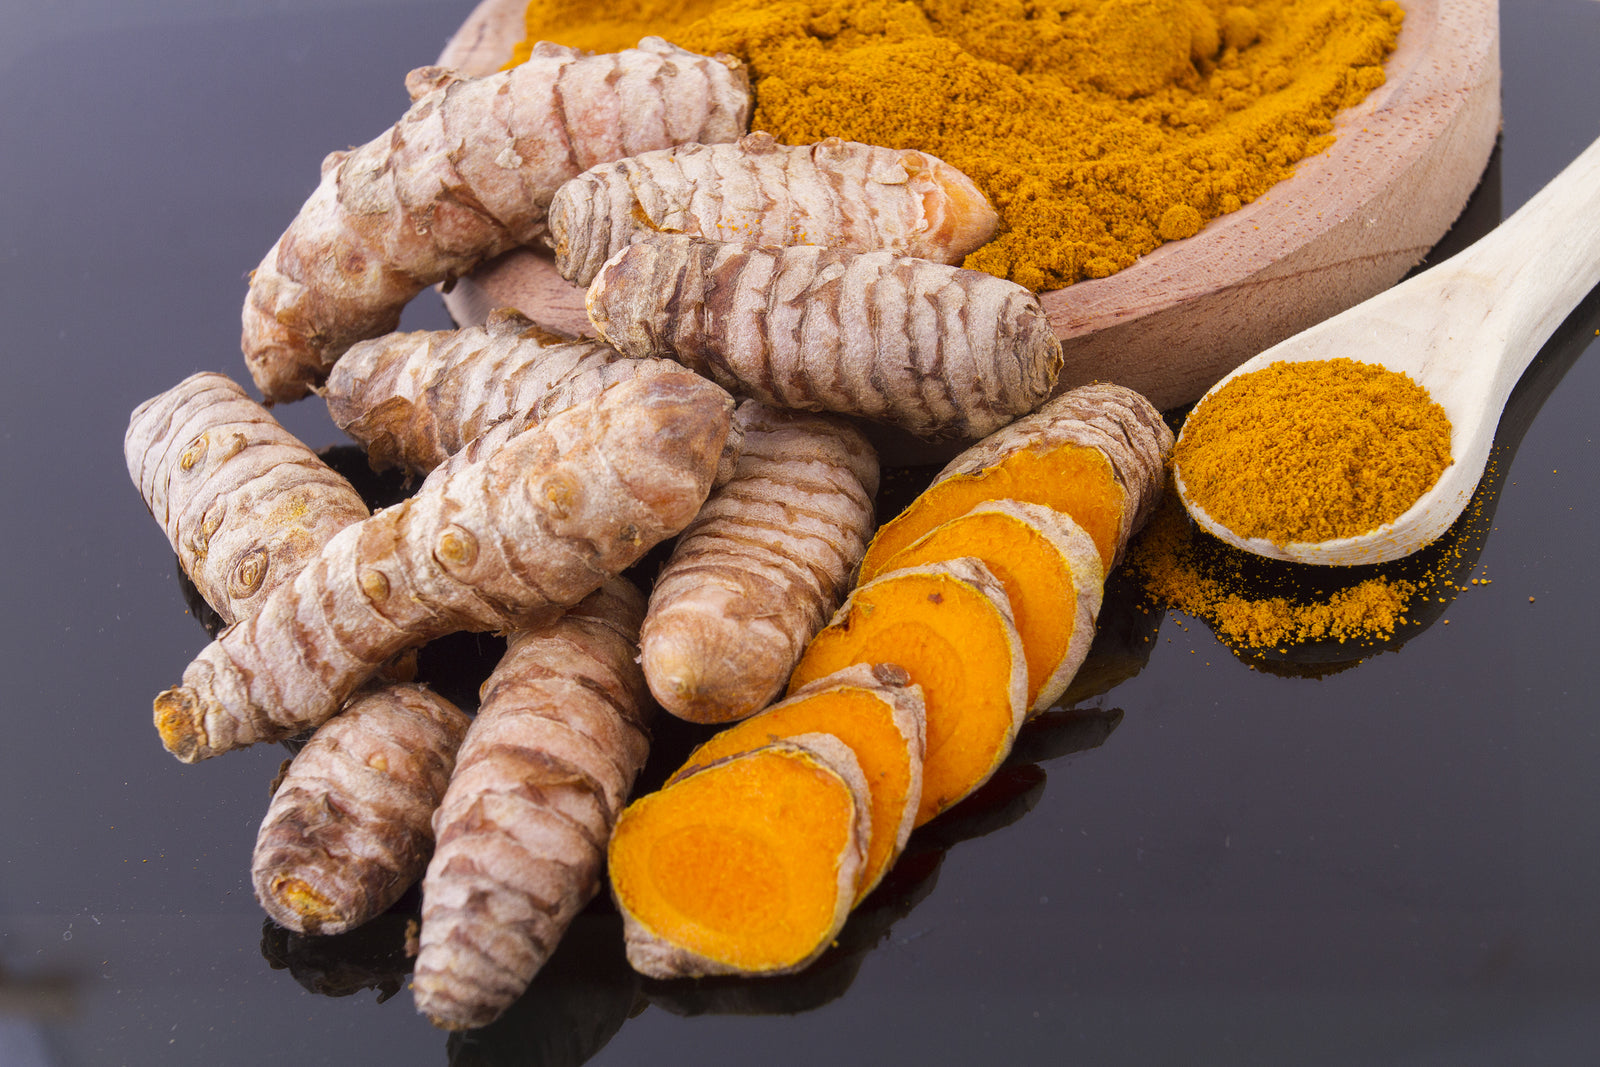 Curcumin pictured in its many different forms Turmeric is added in integrative medicine for joint relief